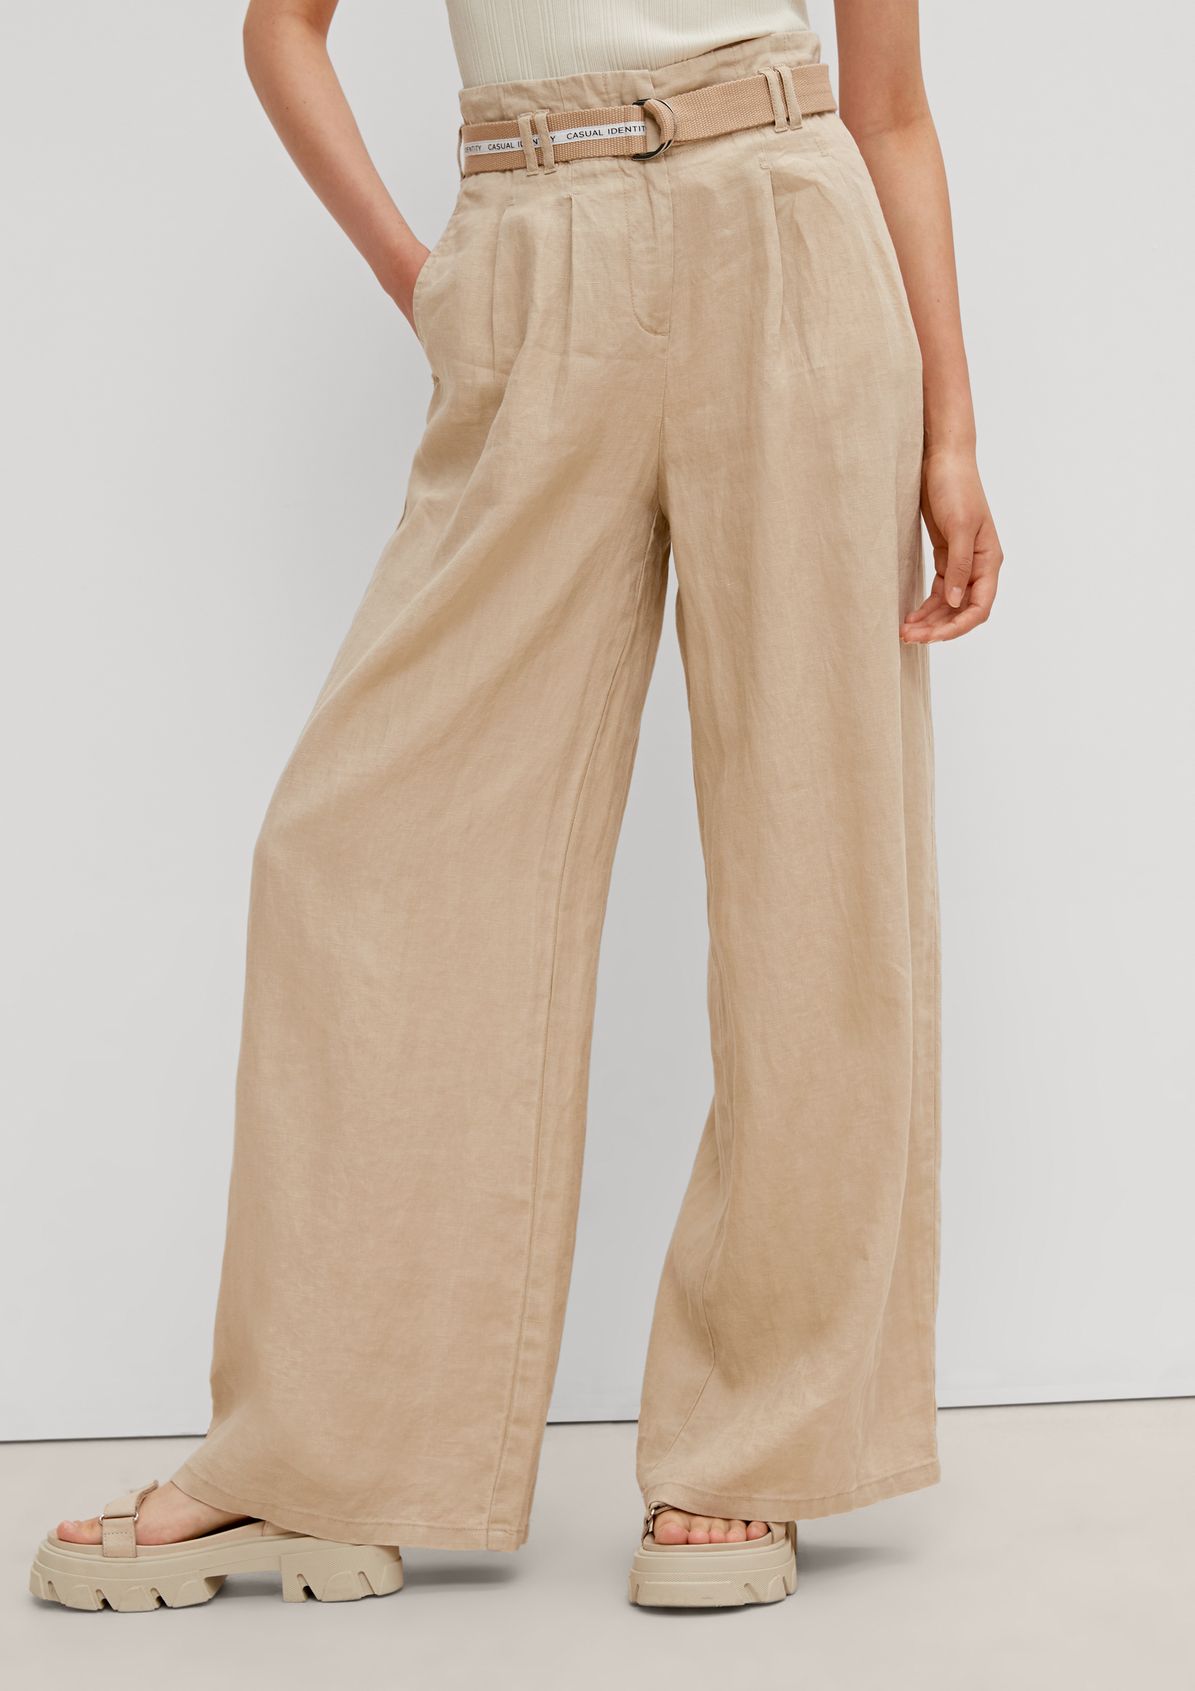 Marlene-style linen trousers from comma